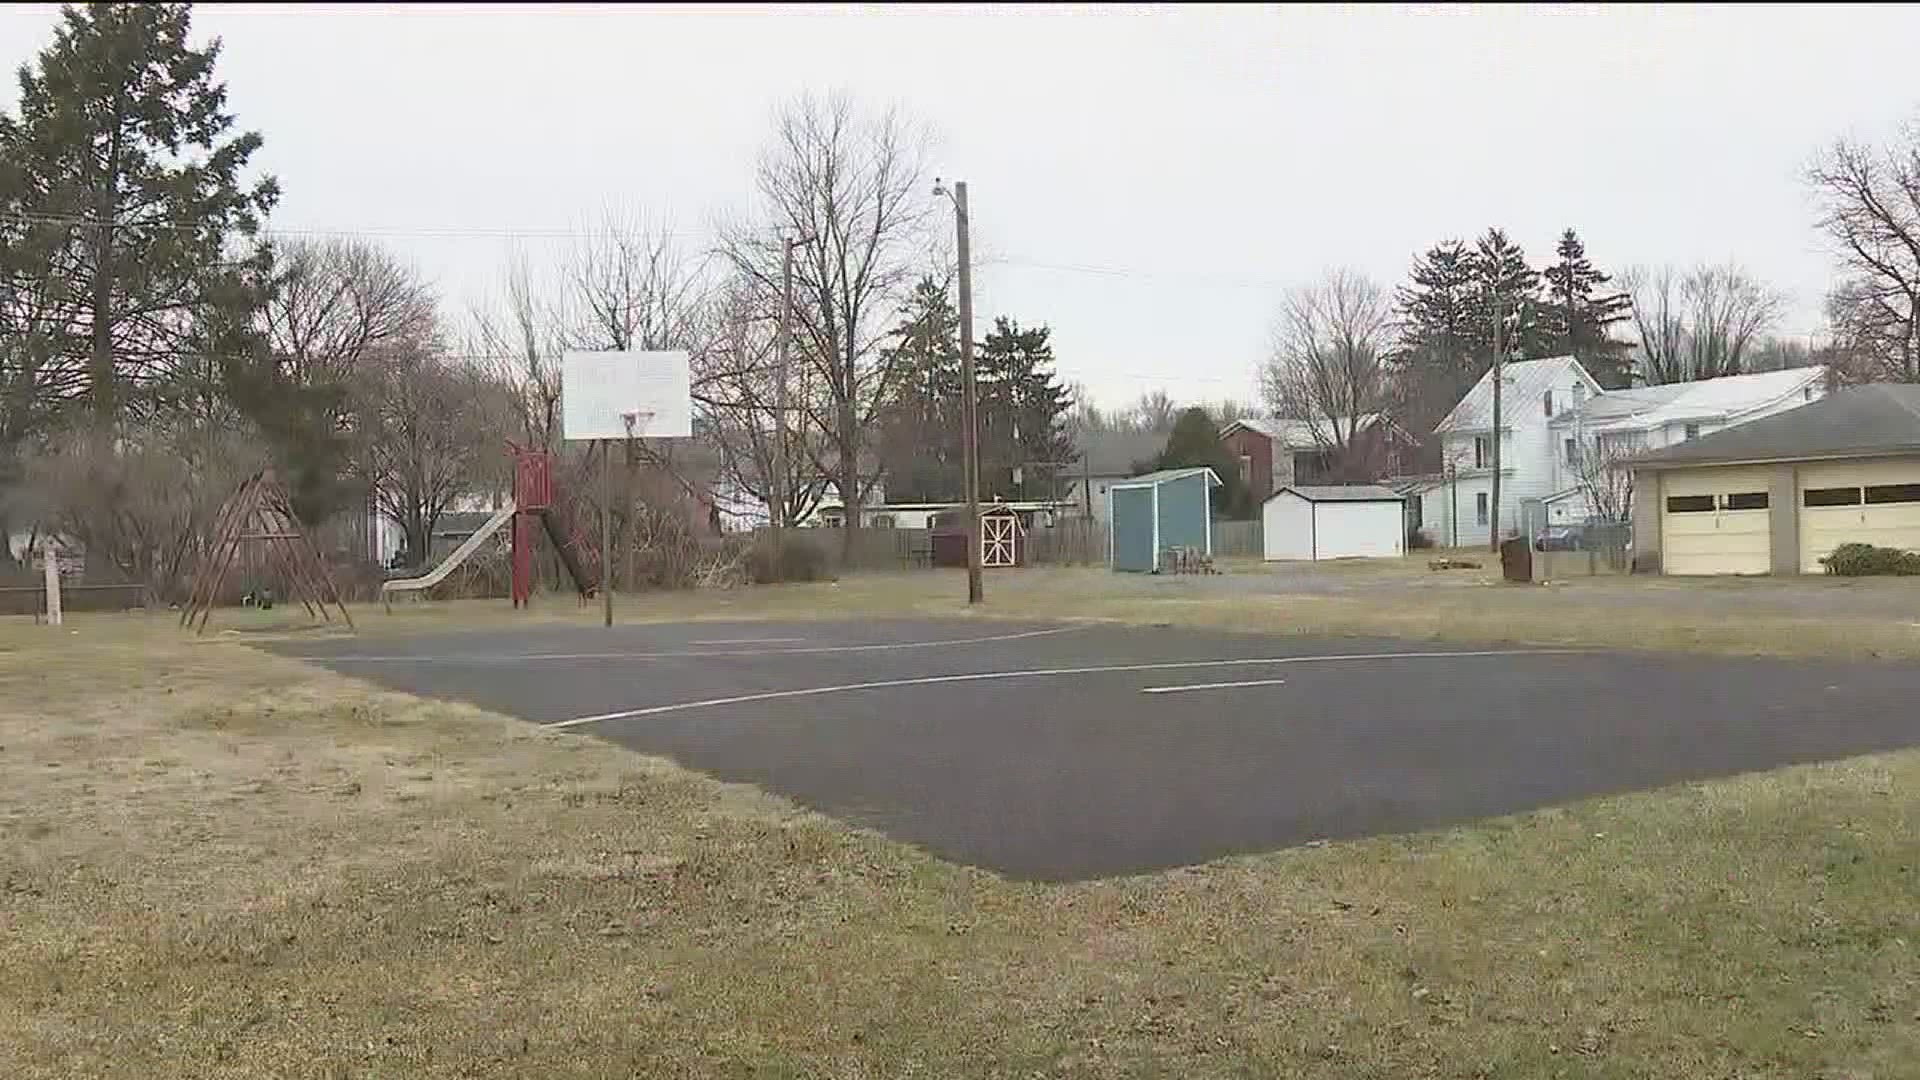 Group wants to rebuild playground in New Columbia.